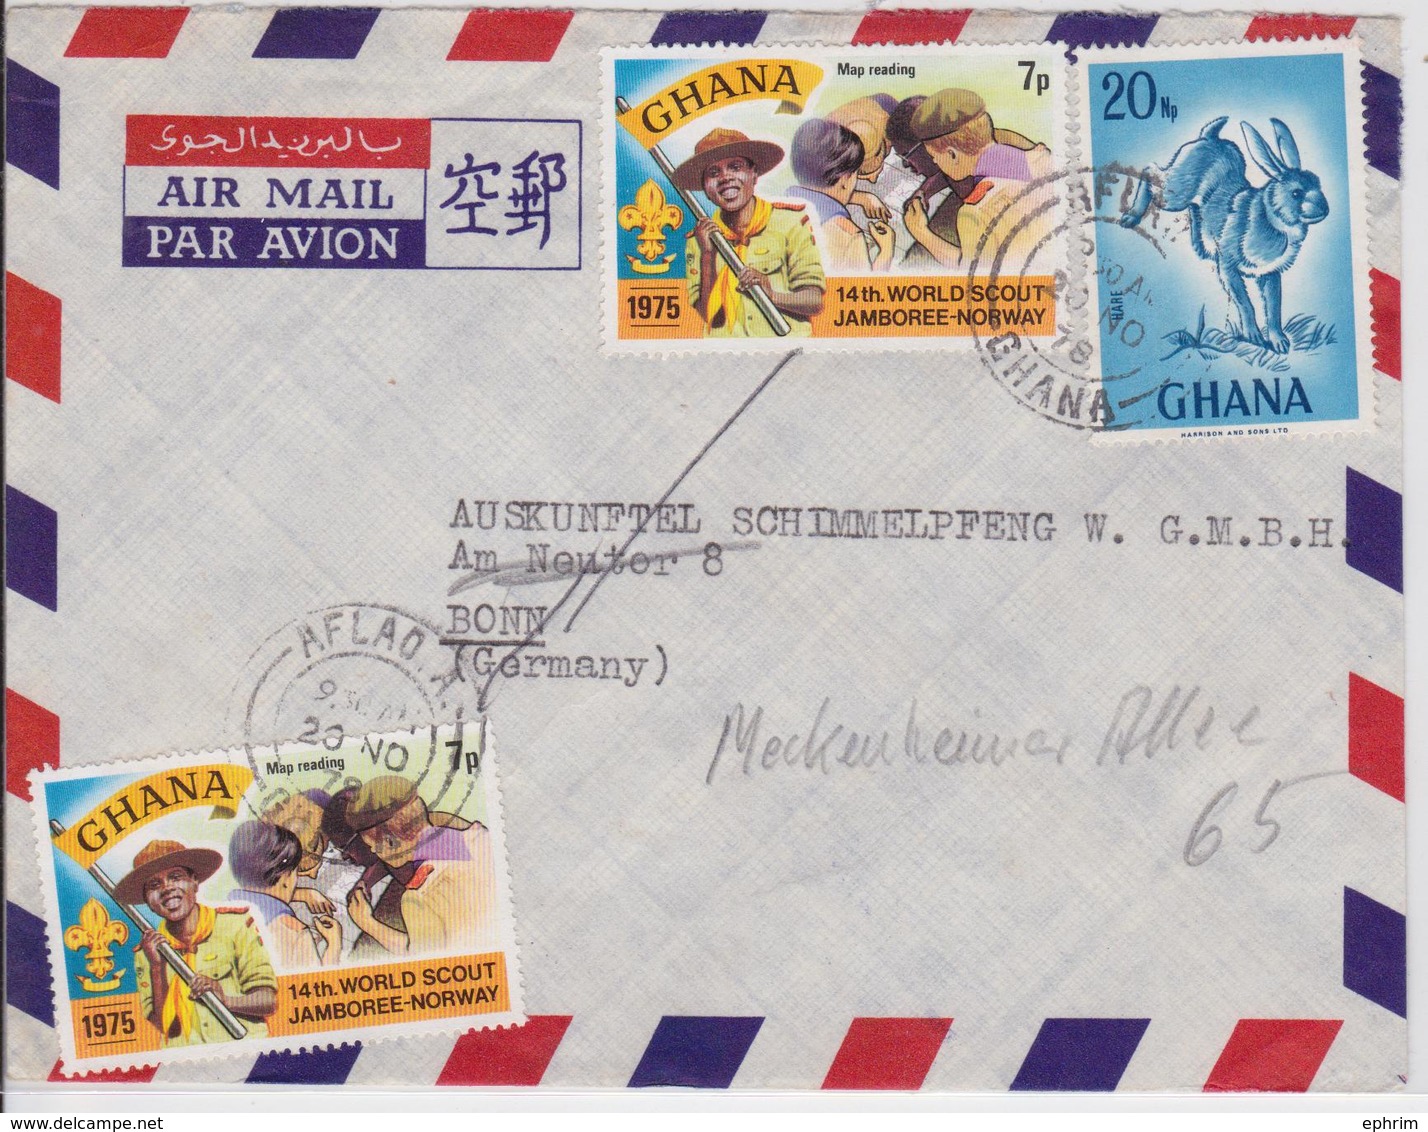 GHANA AFLAO TO BONN 1978 AIR MAIL COVER HARE JAMBOREE-NORWAY 1975 LETTRE TIMBRE SCOUTISME SCOUTS - Lettres & Documents